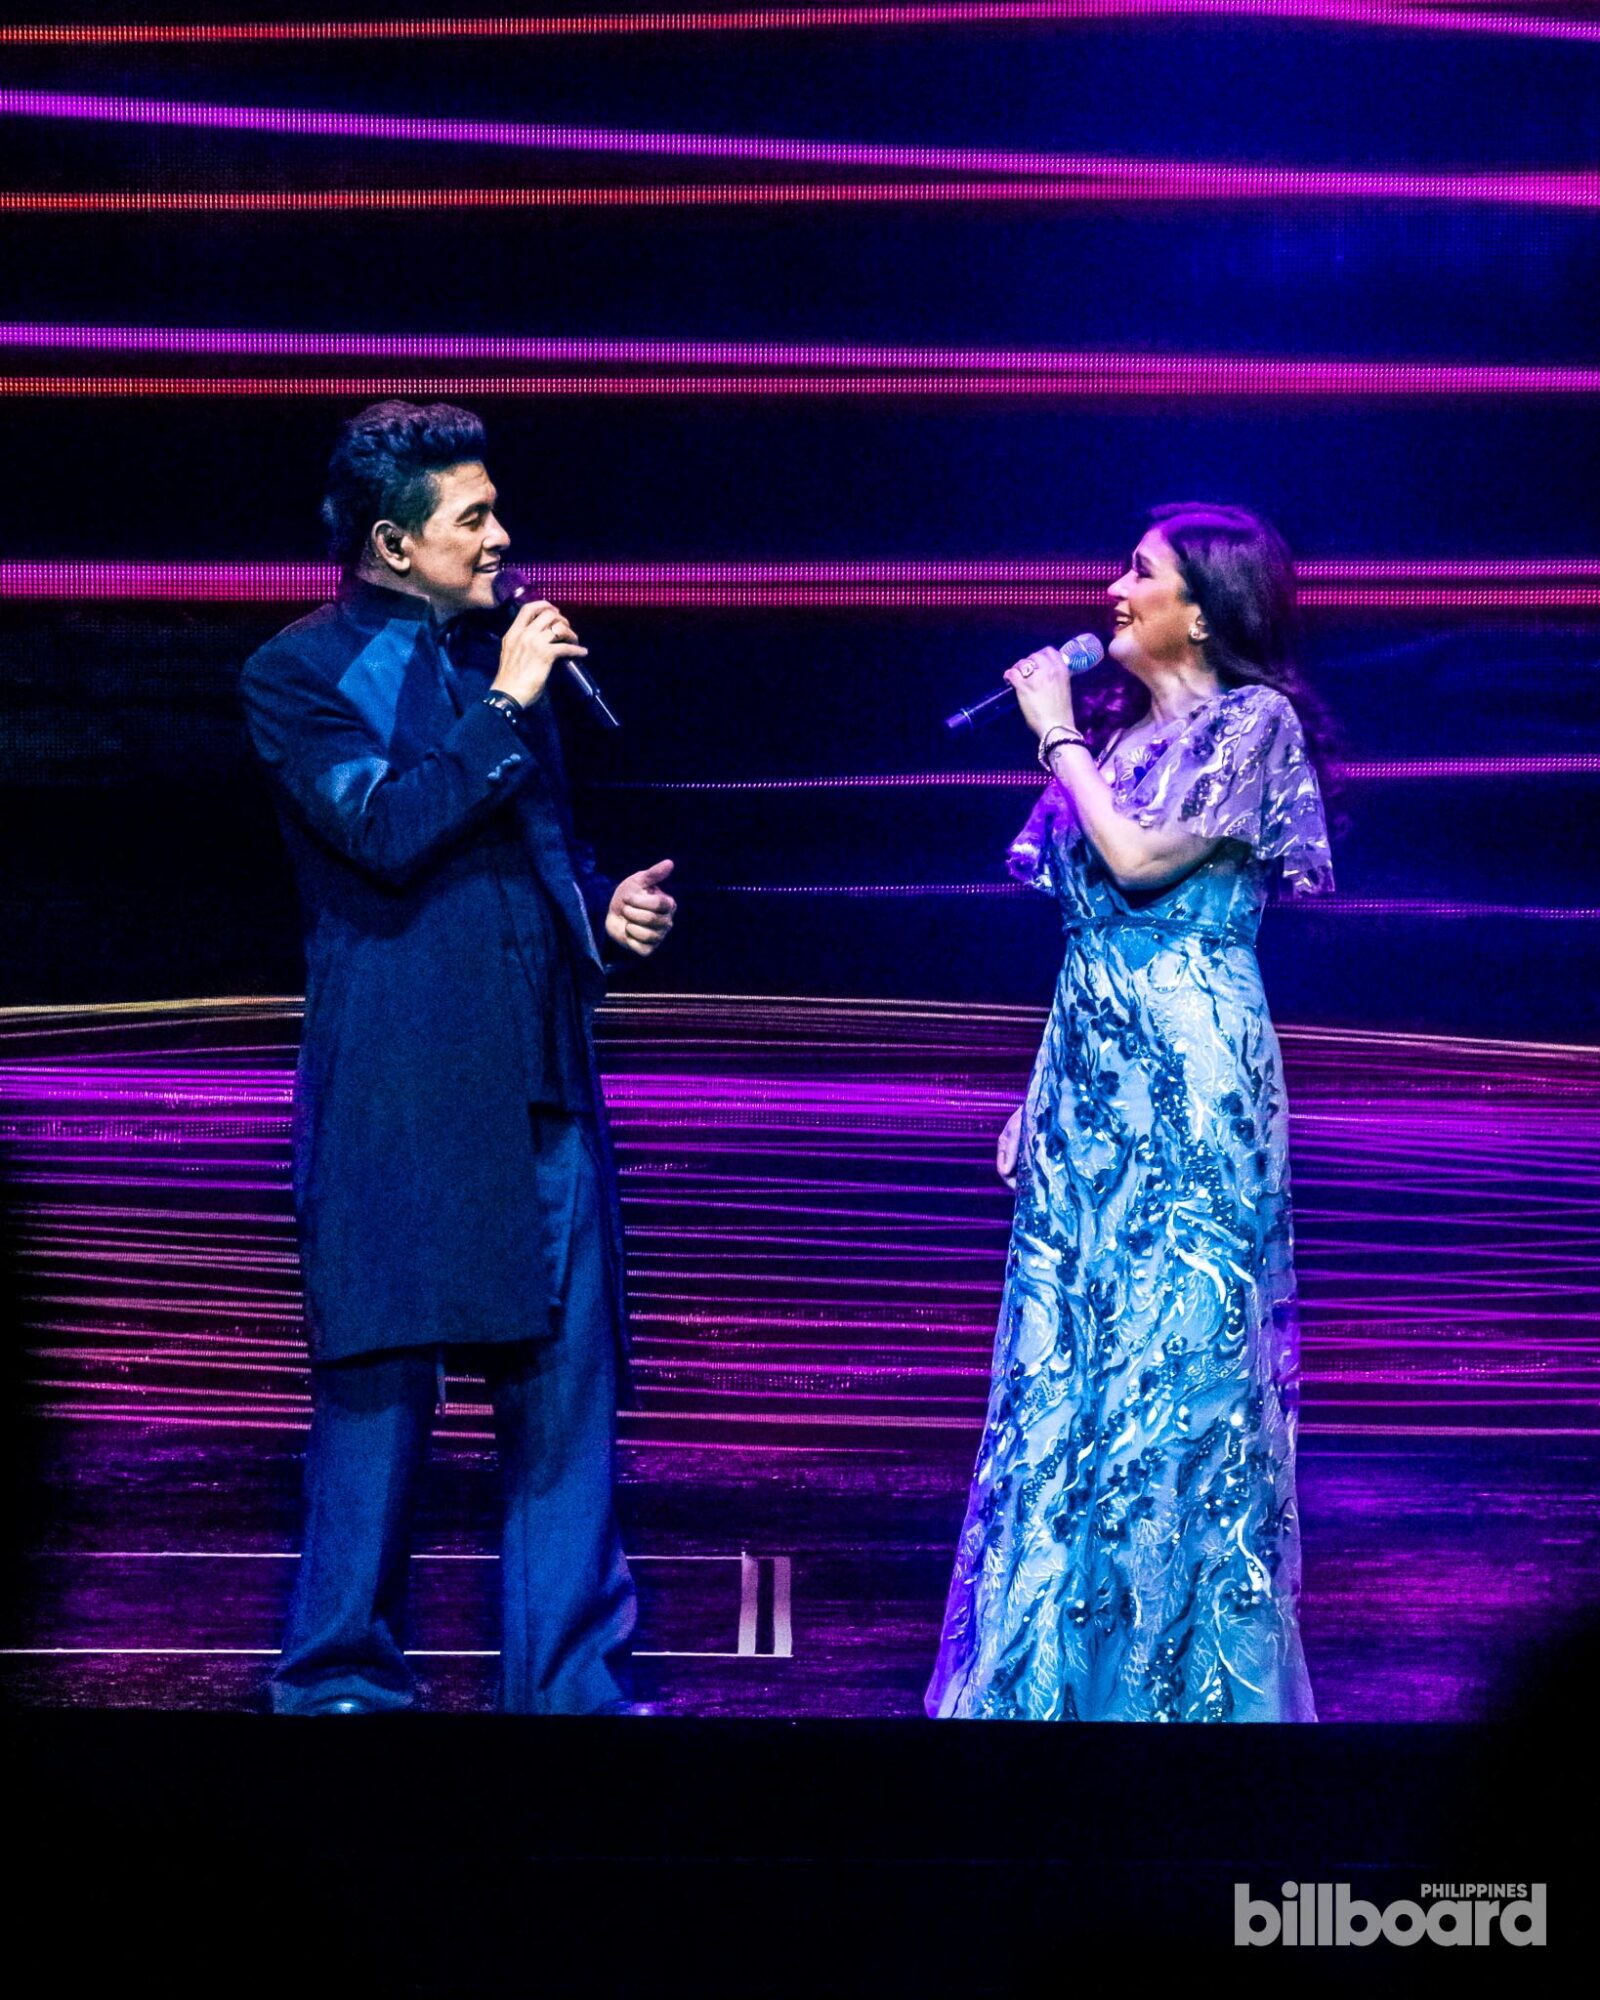 Gary Valenciano with special guest Zsa Zsa Padilla performing at his 40th Anniversary Concert 'Pure Energy'